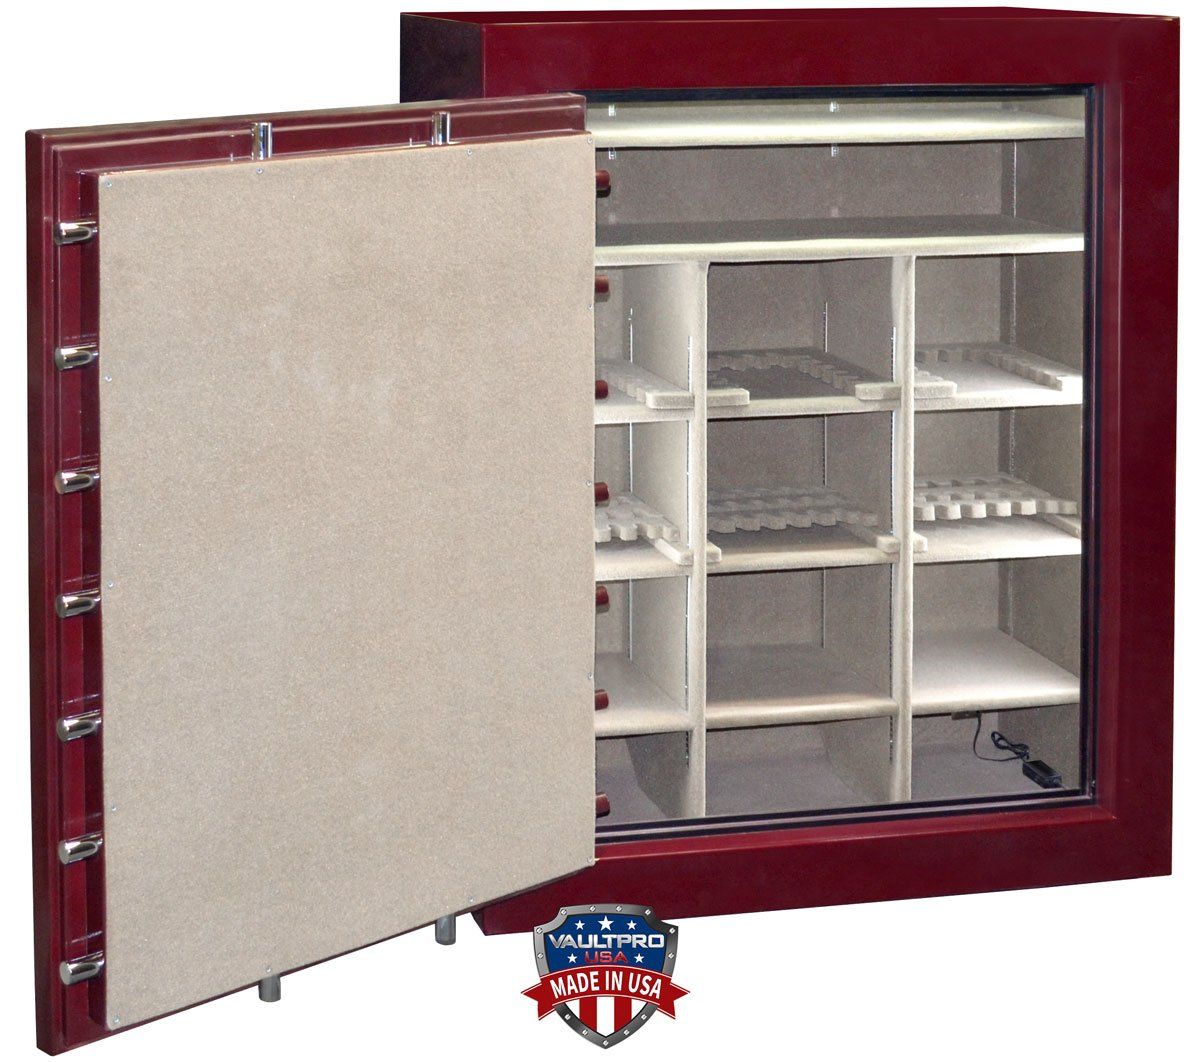 60-gun wide body safes made in USA